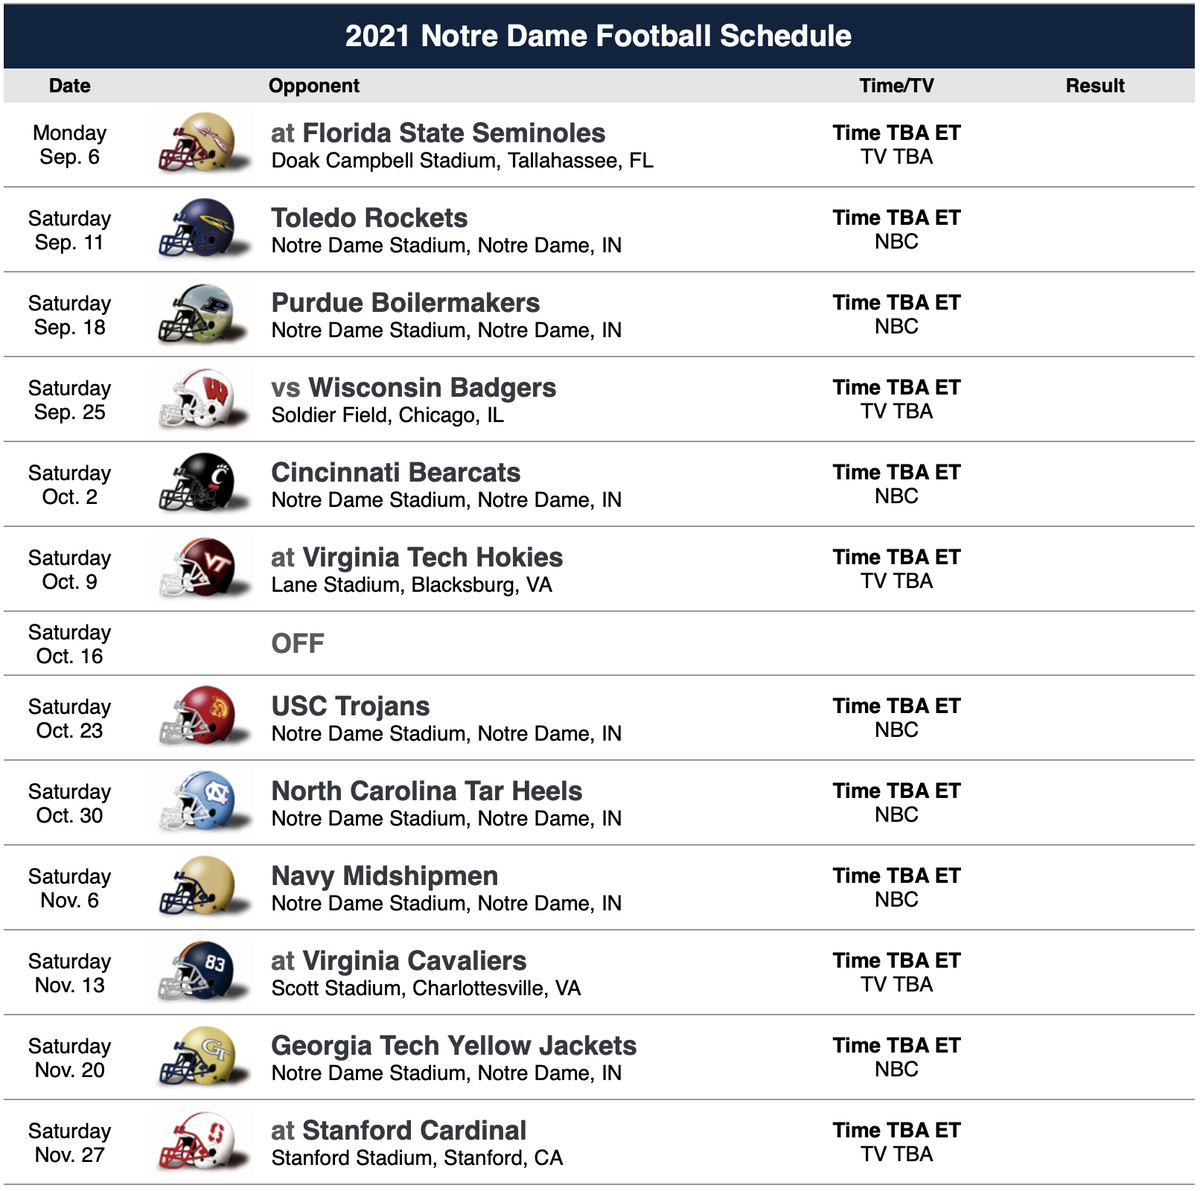 Nd 2022 Football Schedule Looking Ahead To The 2021 Notre Dame Football Schedule And How It Works -  One Foot Down